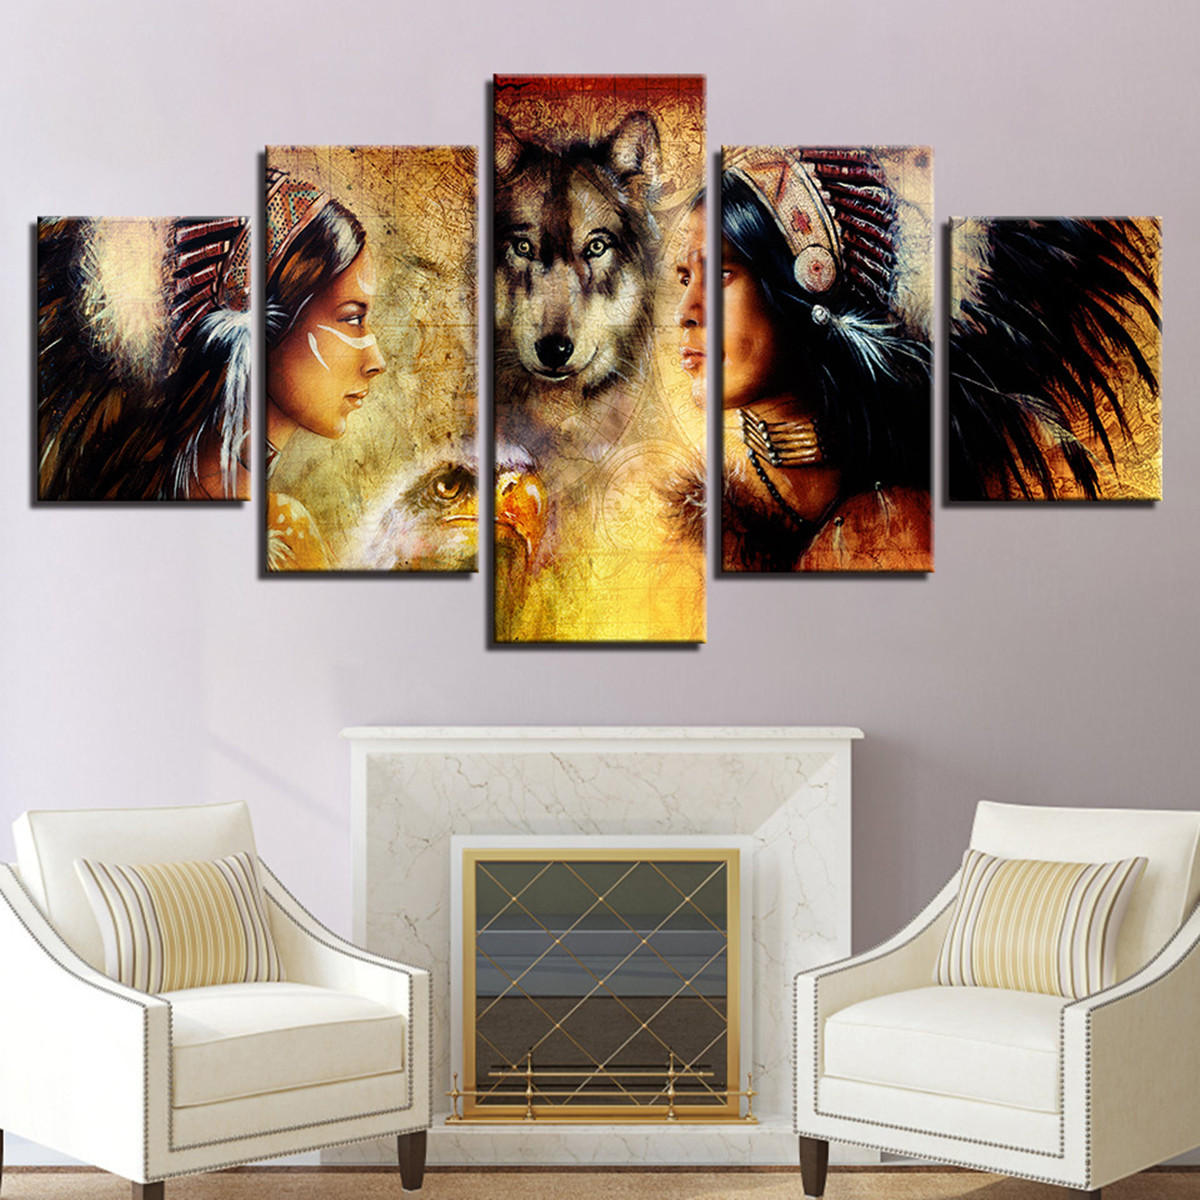 

5Pcs Set Wolf Modern Canvas Print Paintings Wall Art Pictures Home Decor Unframed